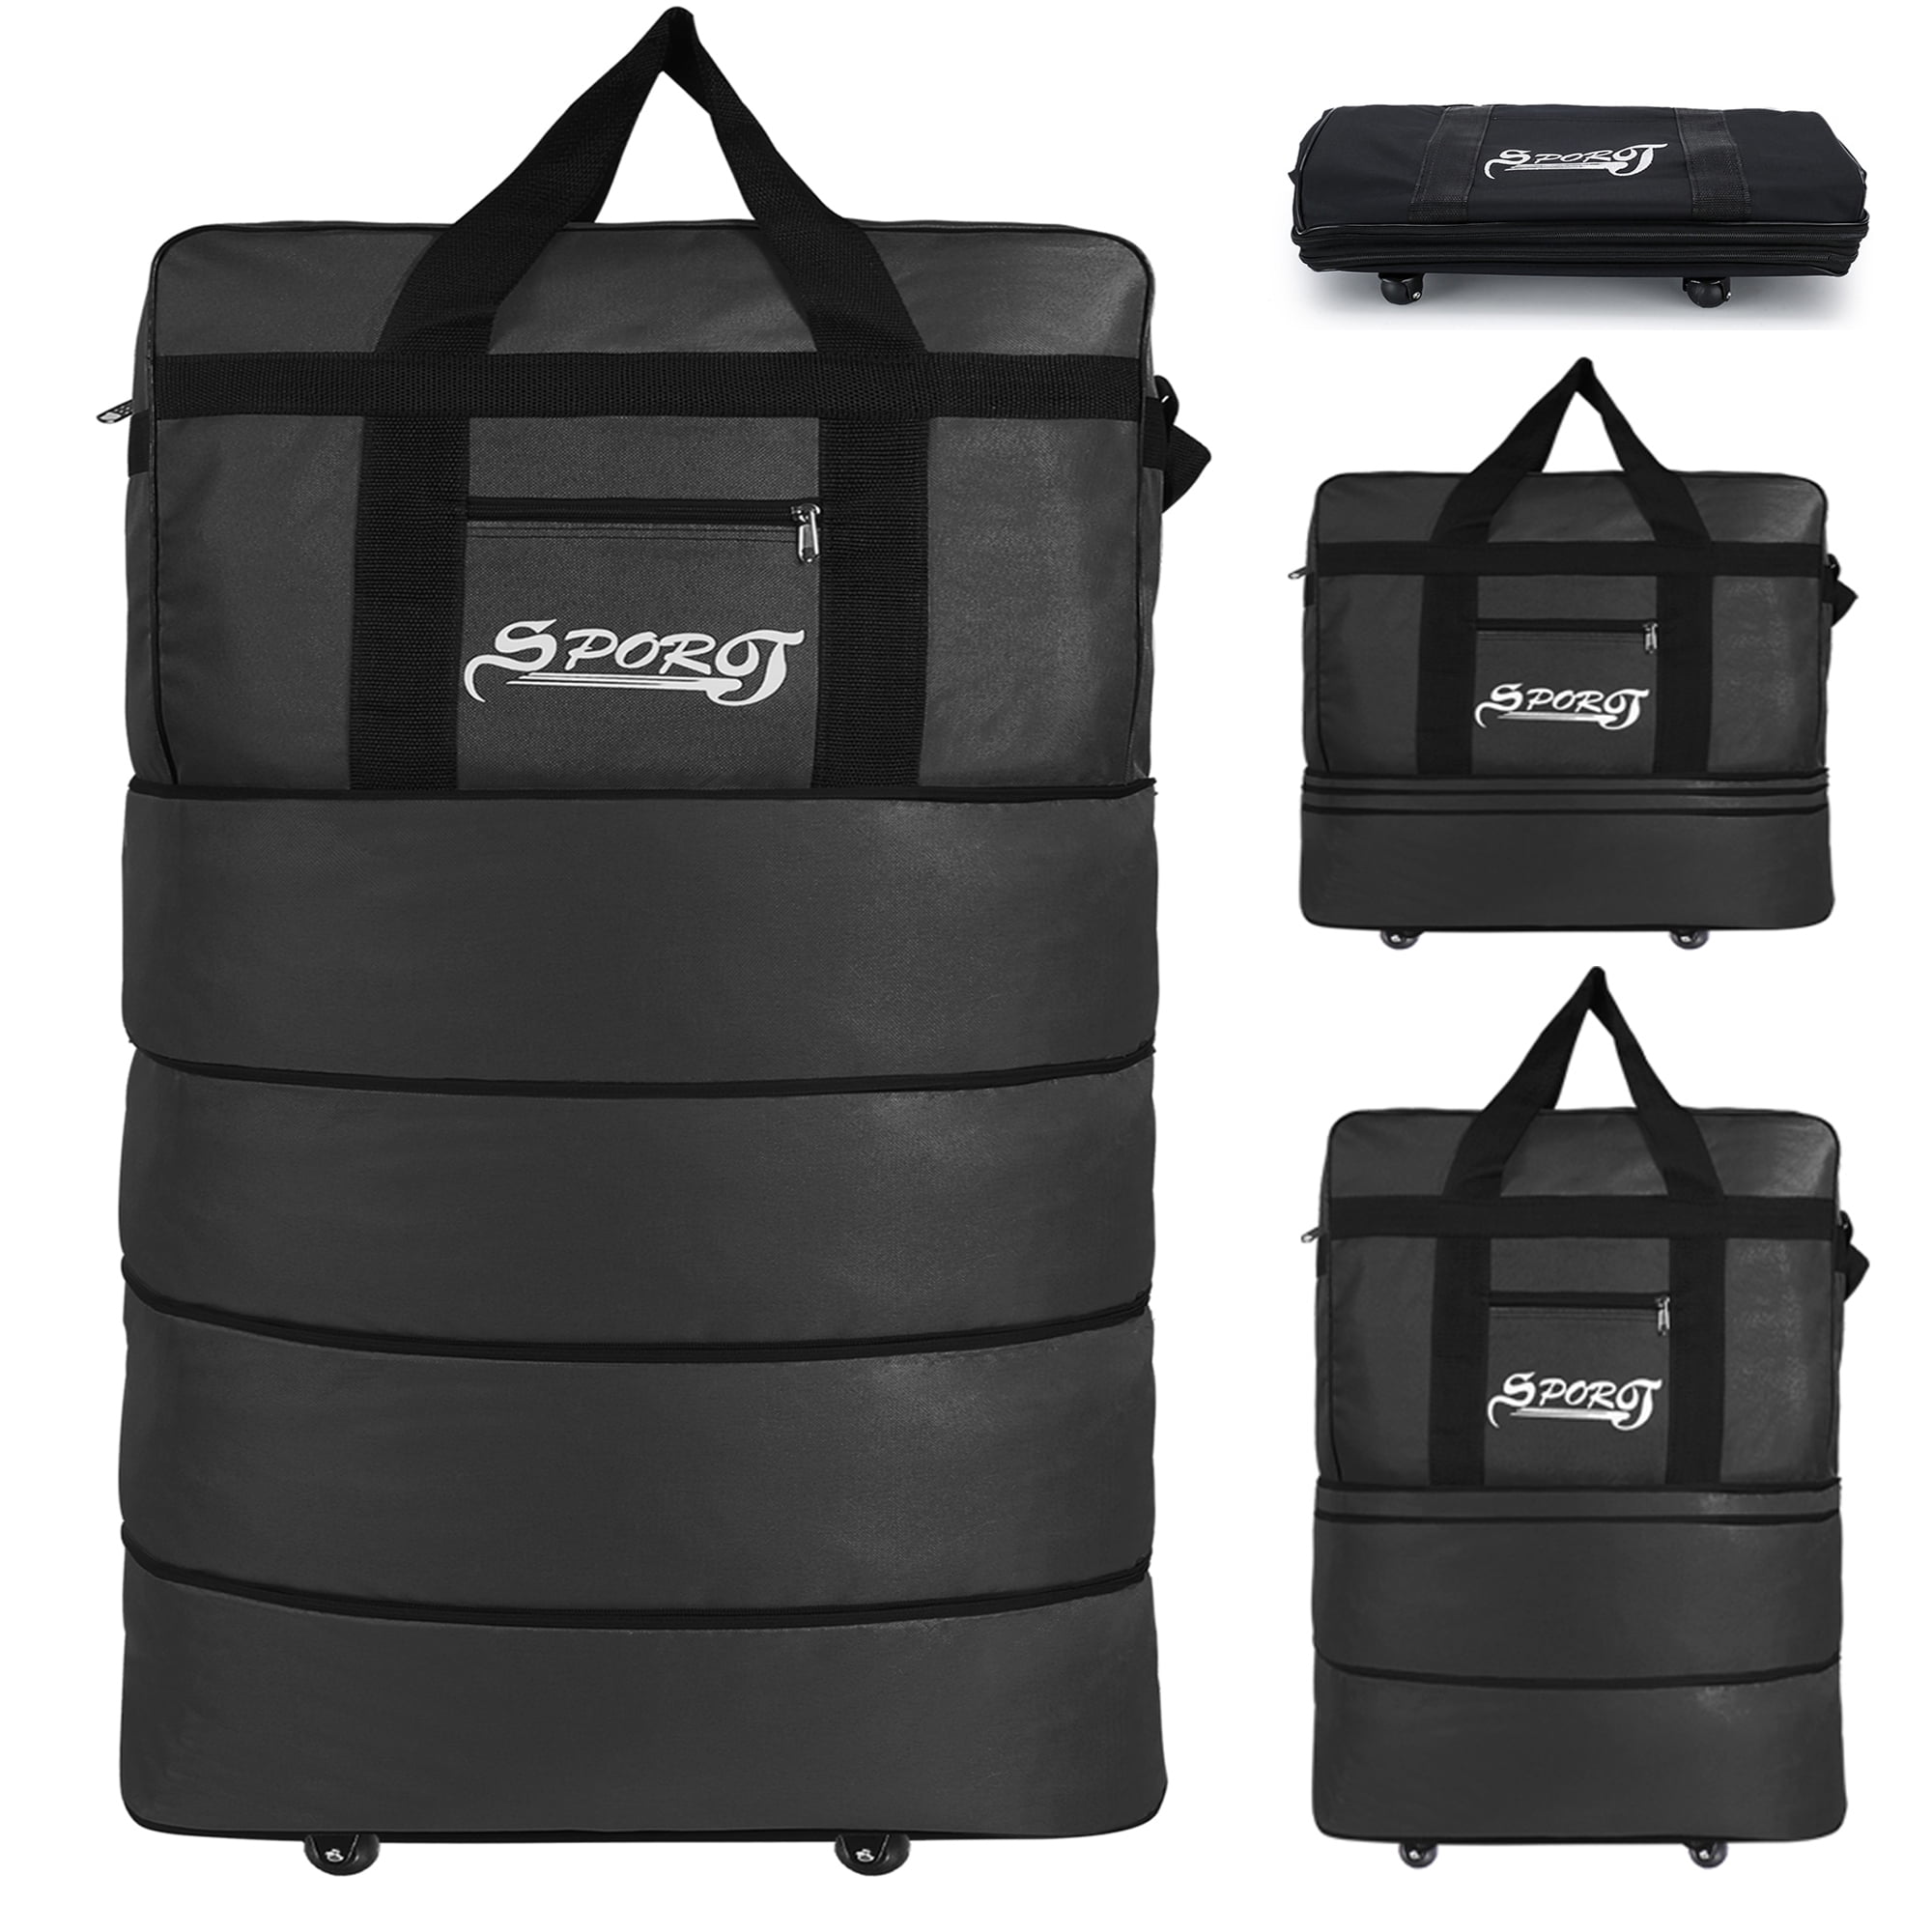 Rolling Tote, Lightweight Collapsible Craft Bag- Black and Gray